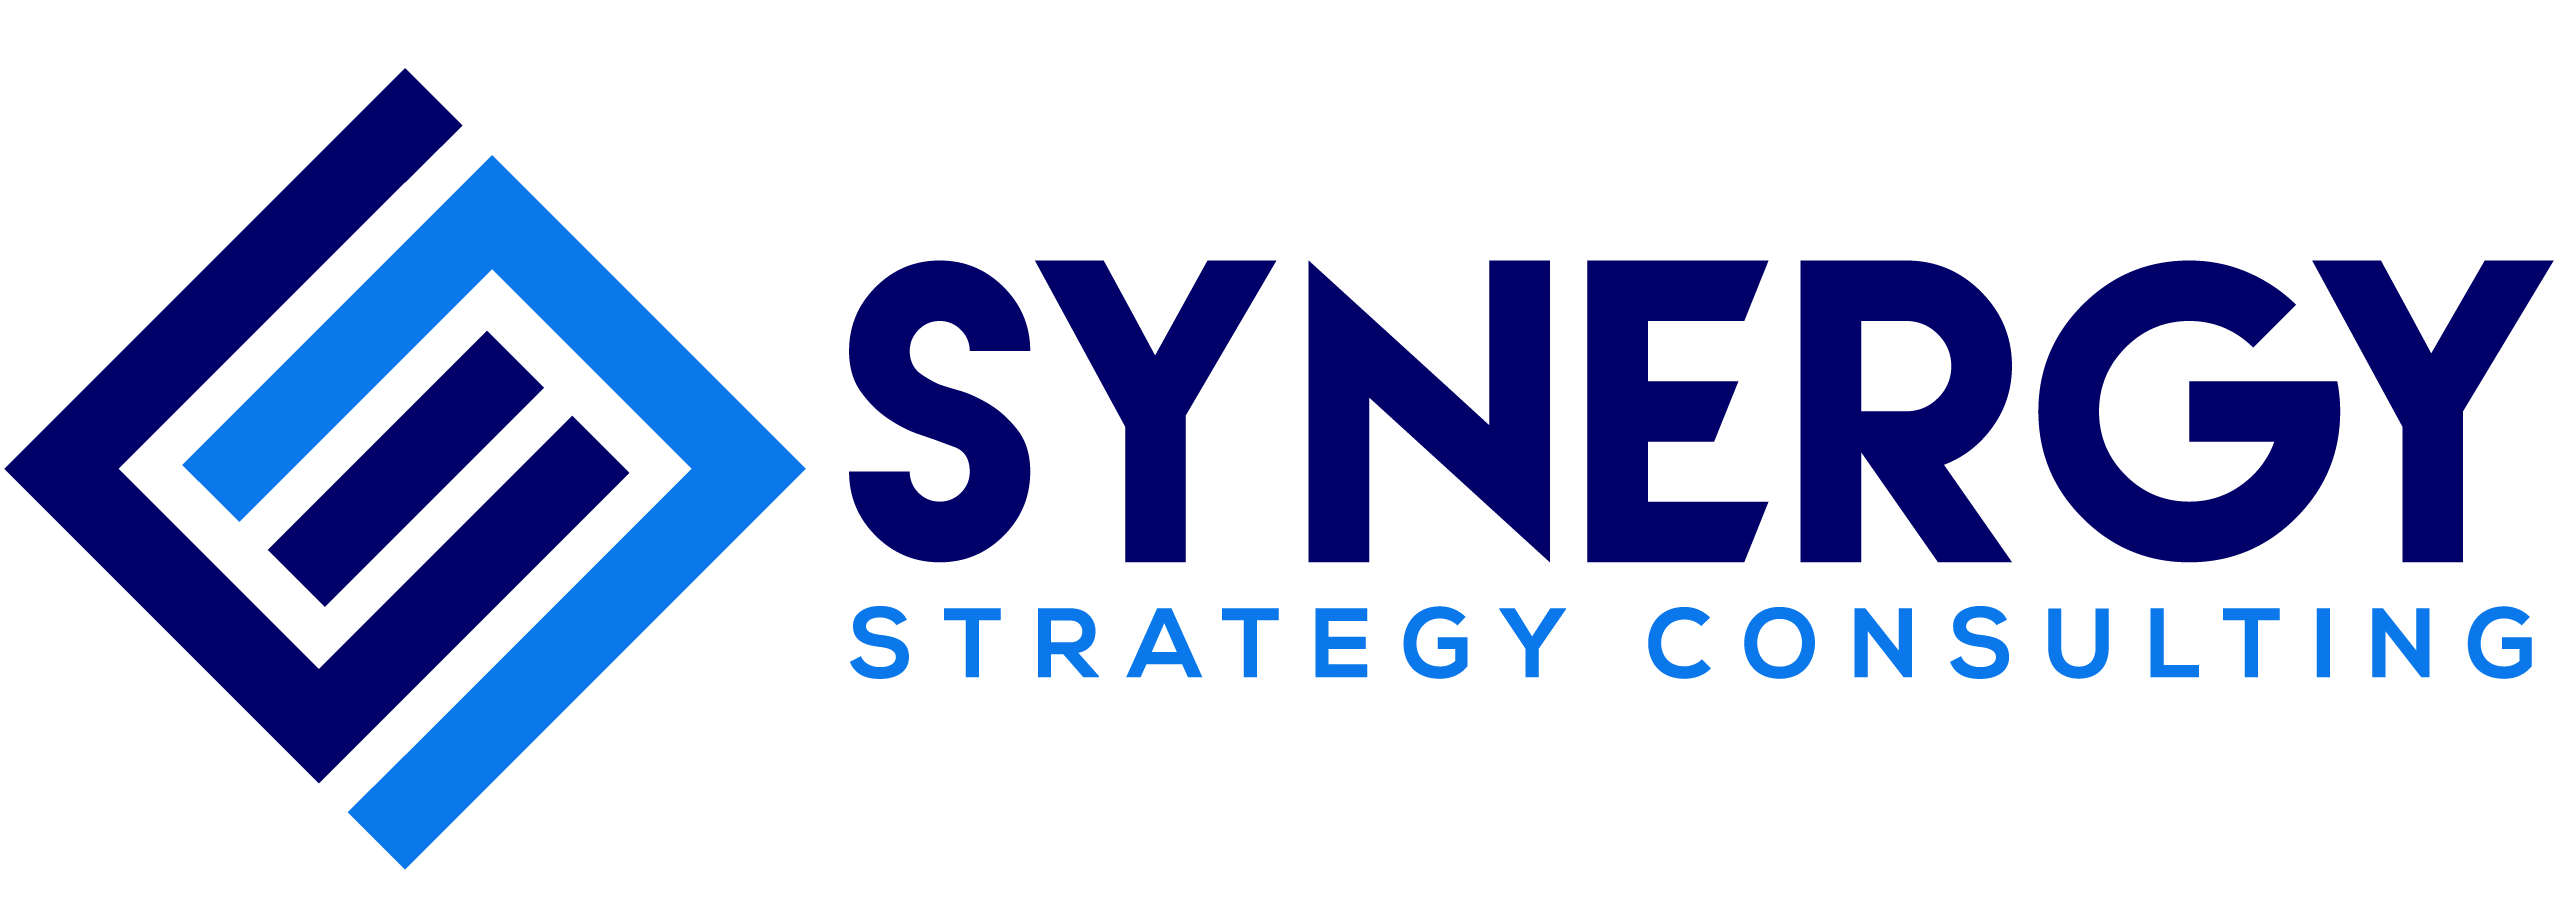 Synergy Strategy Consulting is Now Offering Grant Research And Writing Services Through Its New Website 